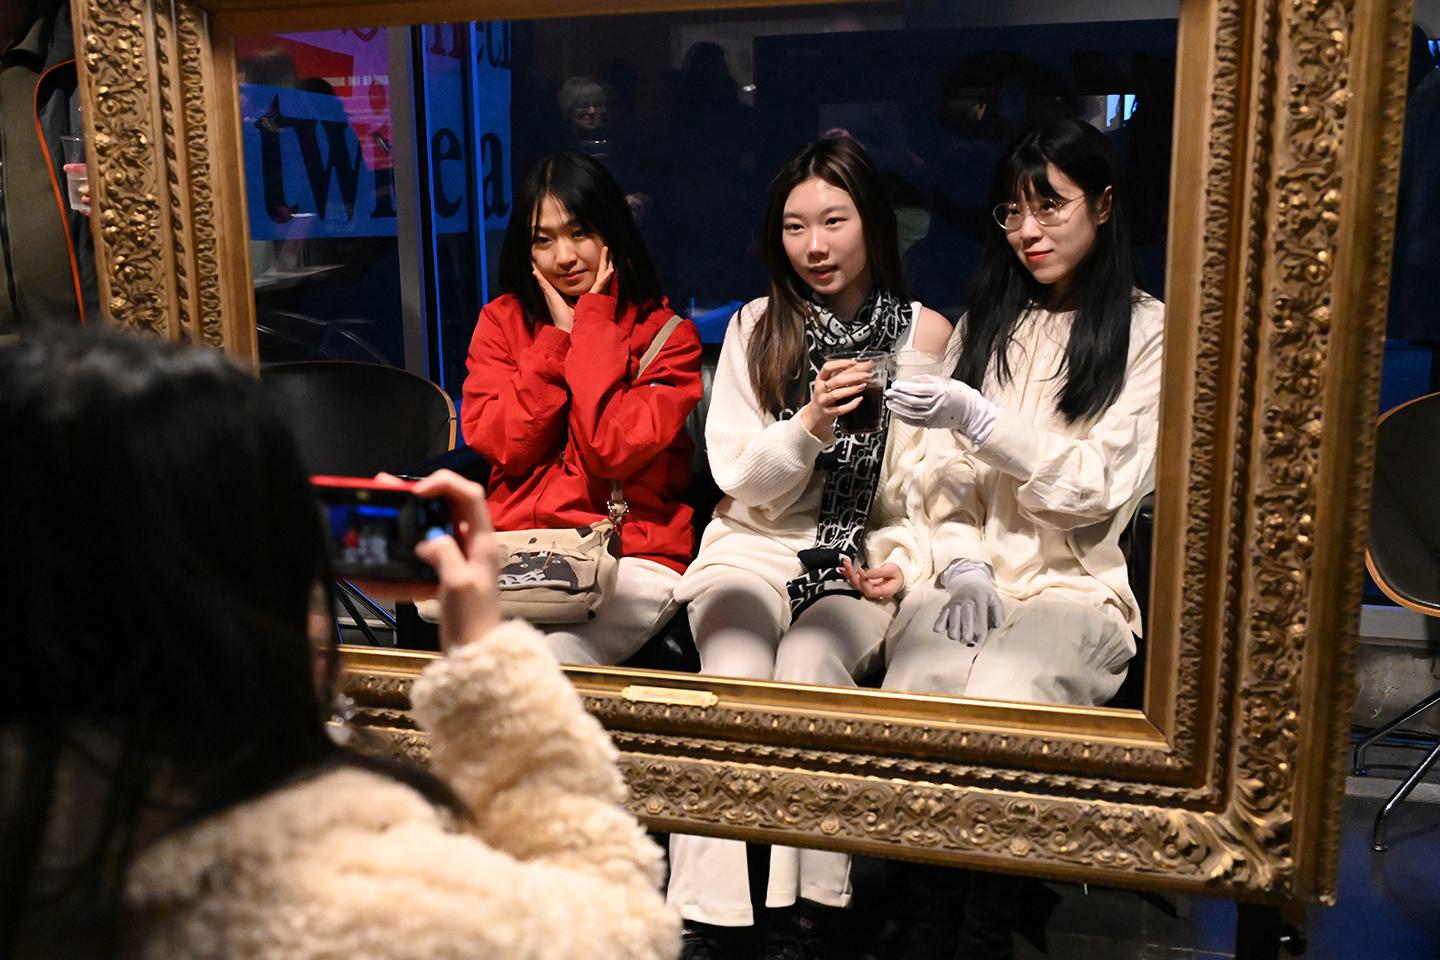 Three students pose for a photo within a gold frame.